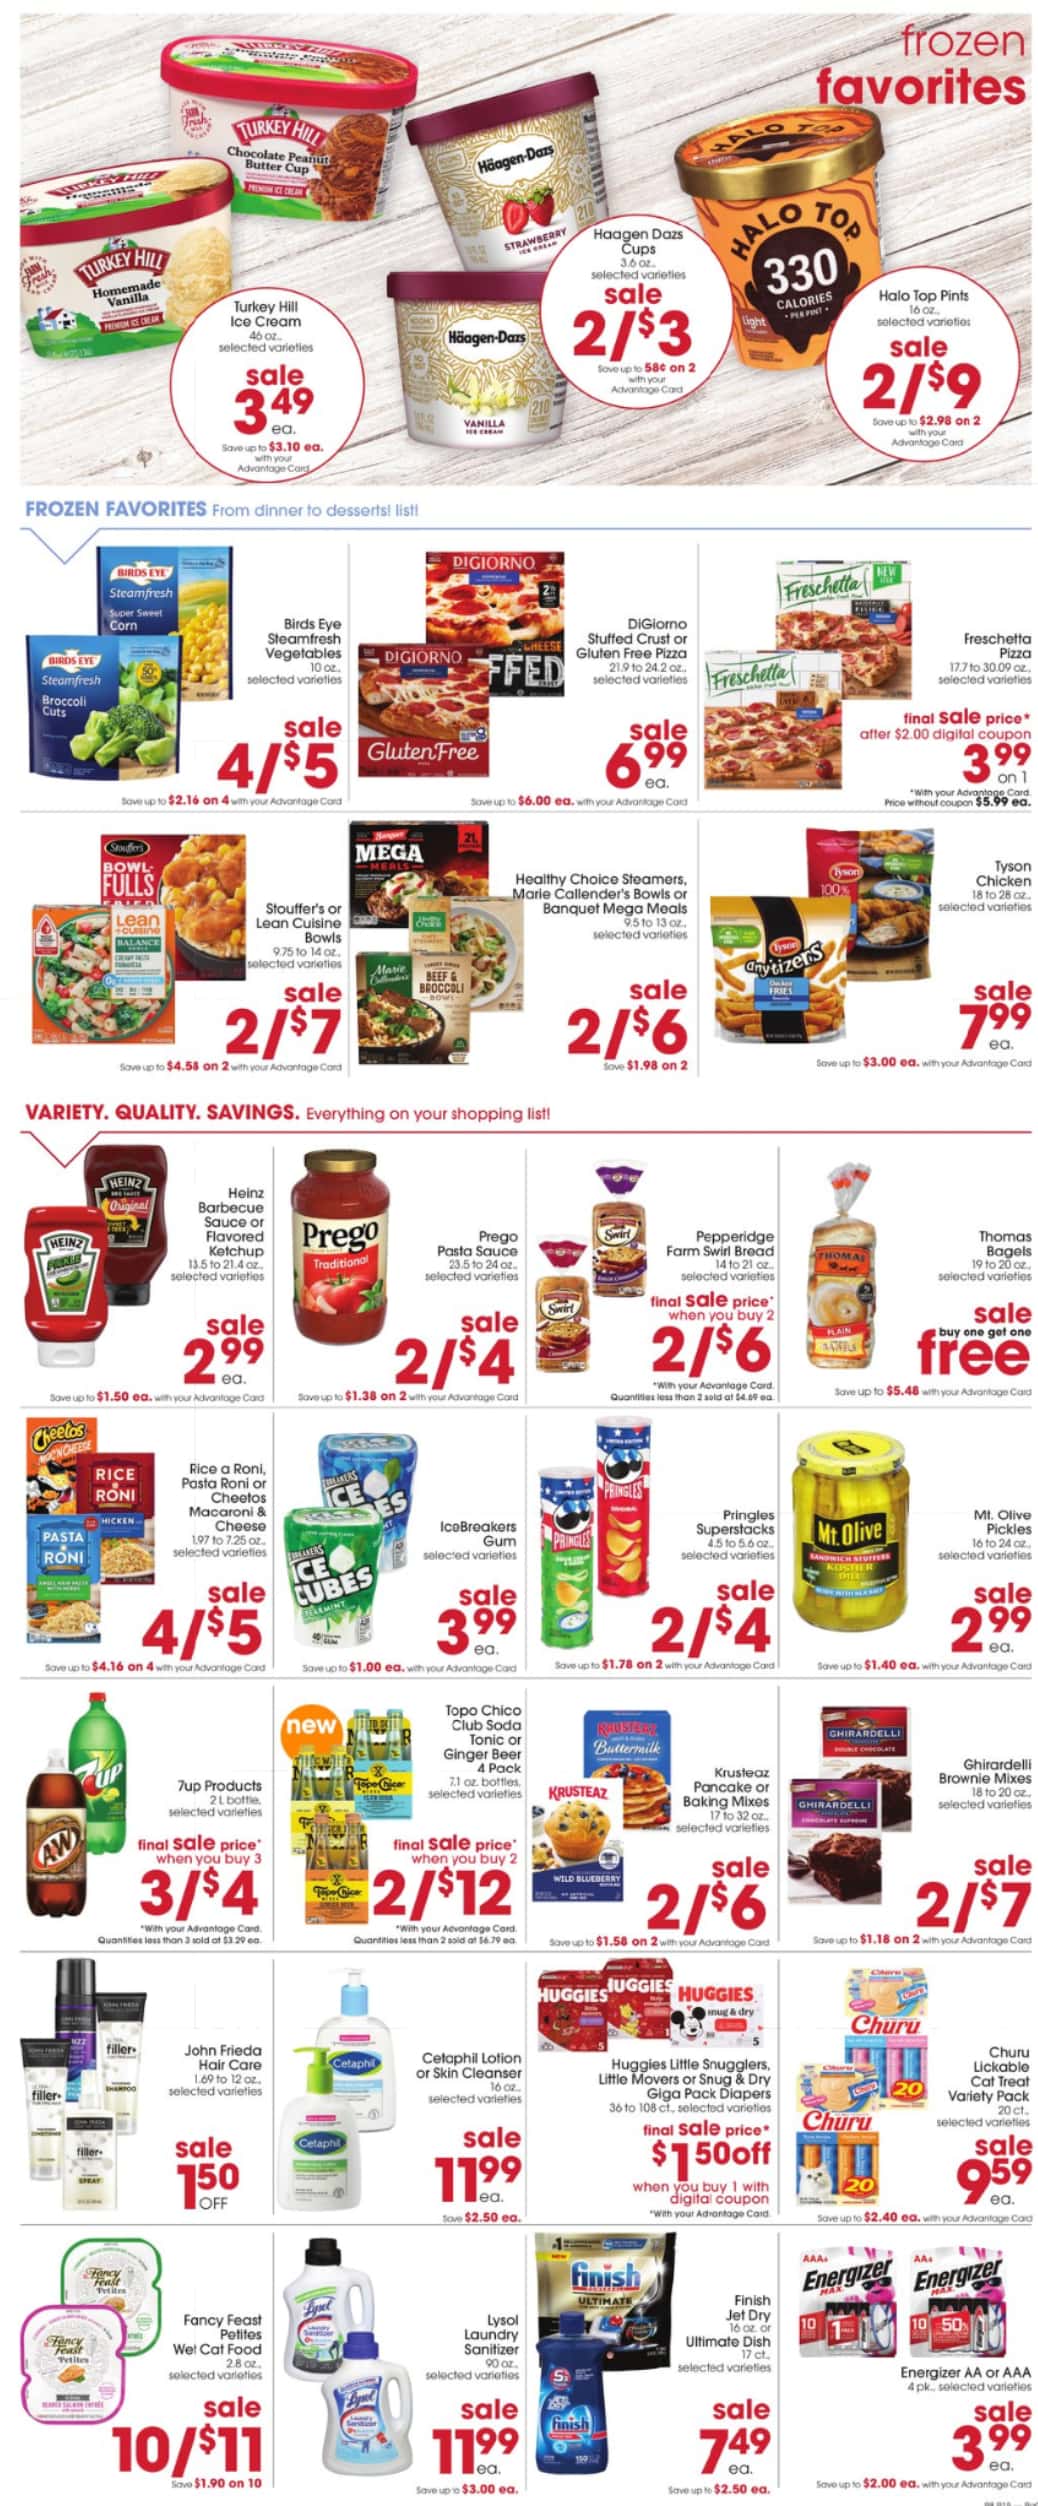 Giant Eagle July 2024 Weekly Sales, Deals, Discounts and Digital Coupons.